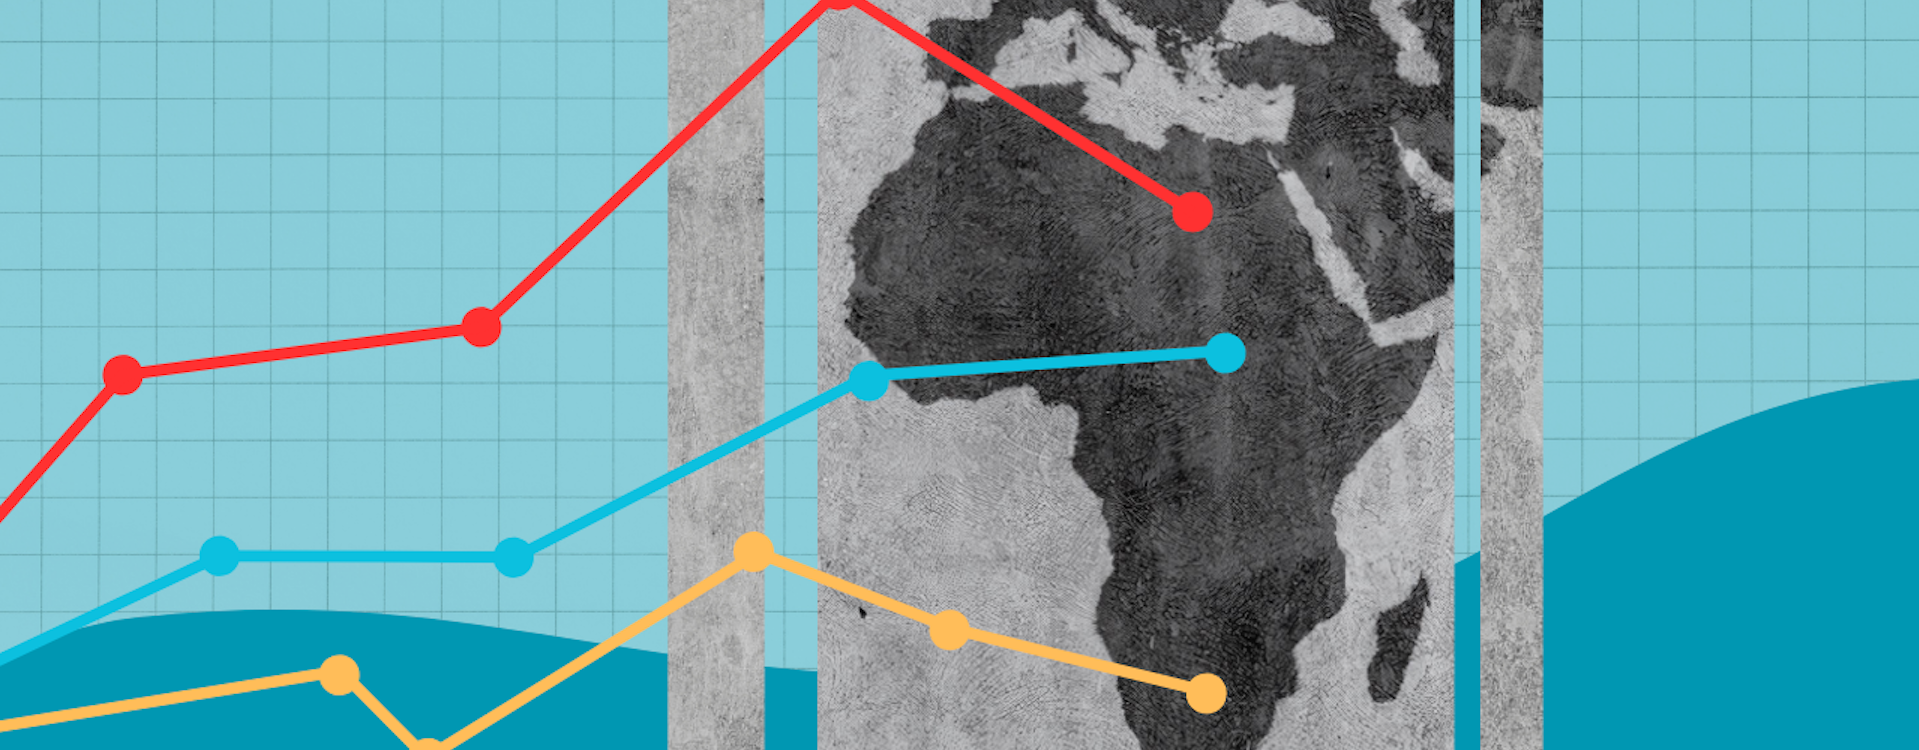 Foresight modelling series: Africa’s development path and potential